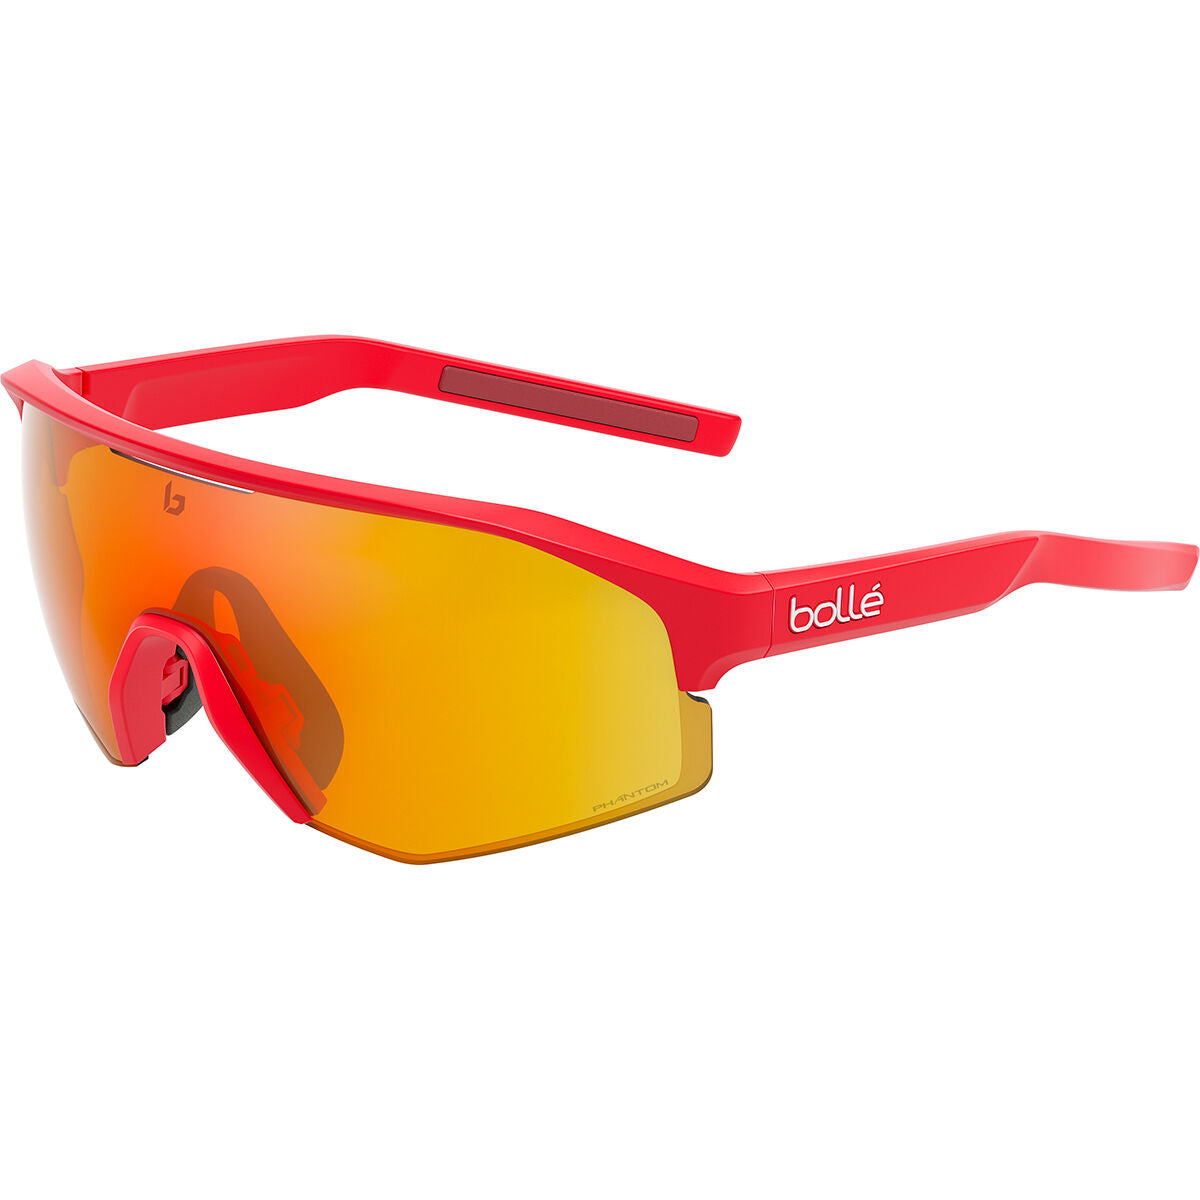 Bolle Lightshifter Xl Sunglasses  Red Matte One Size